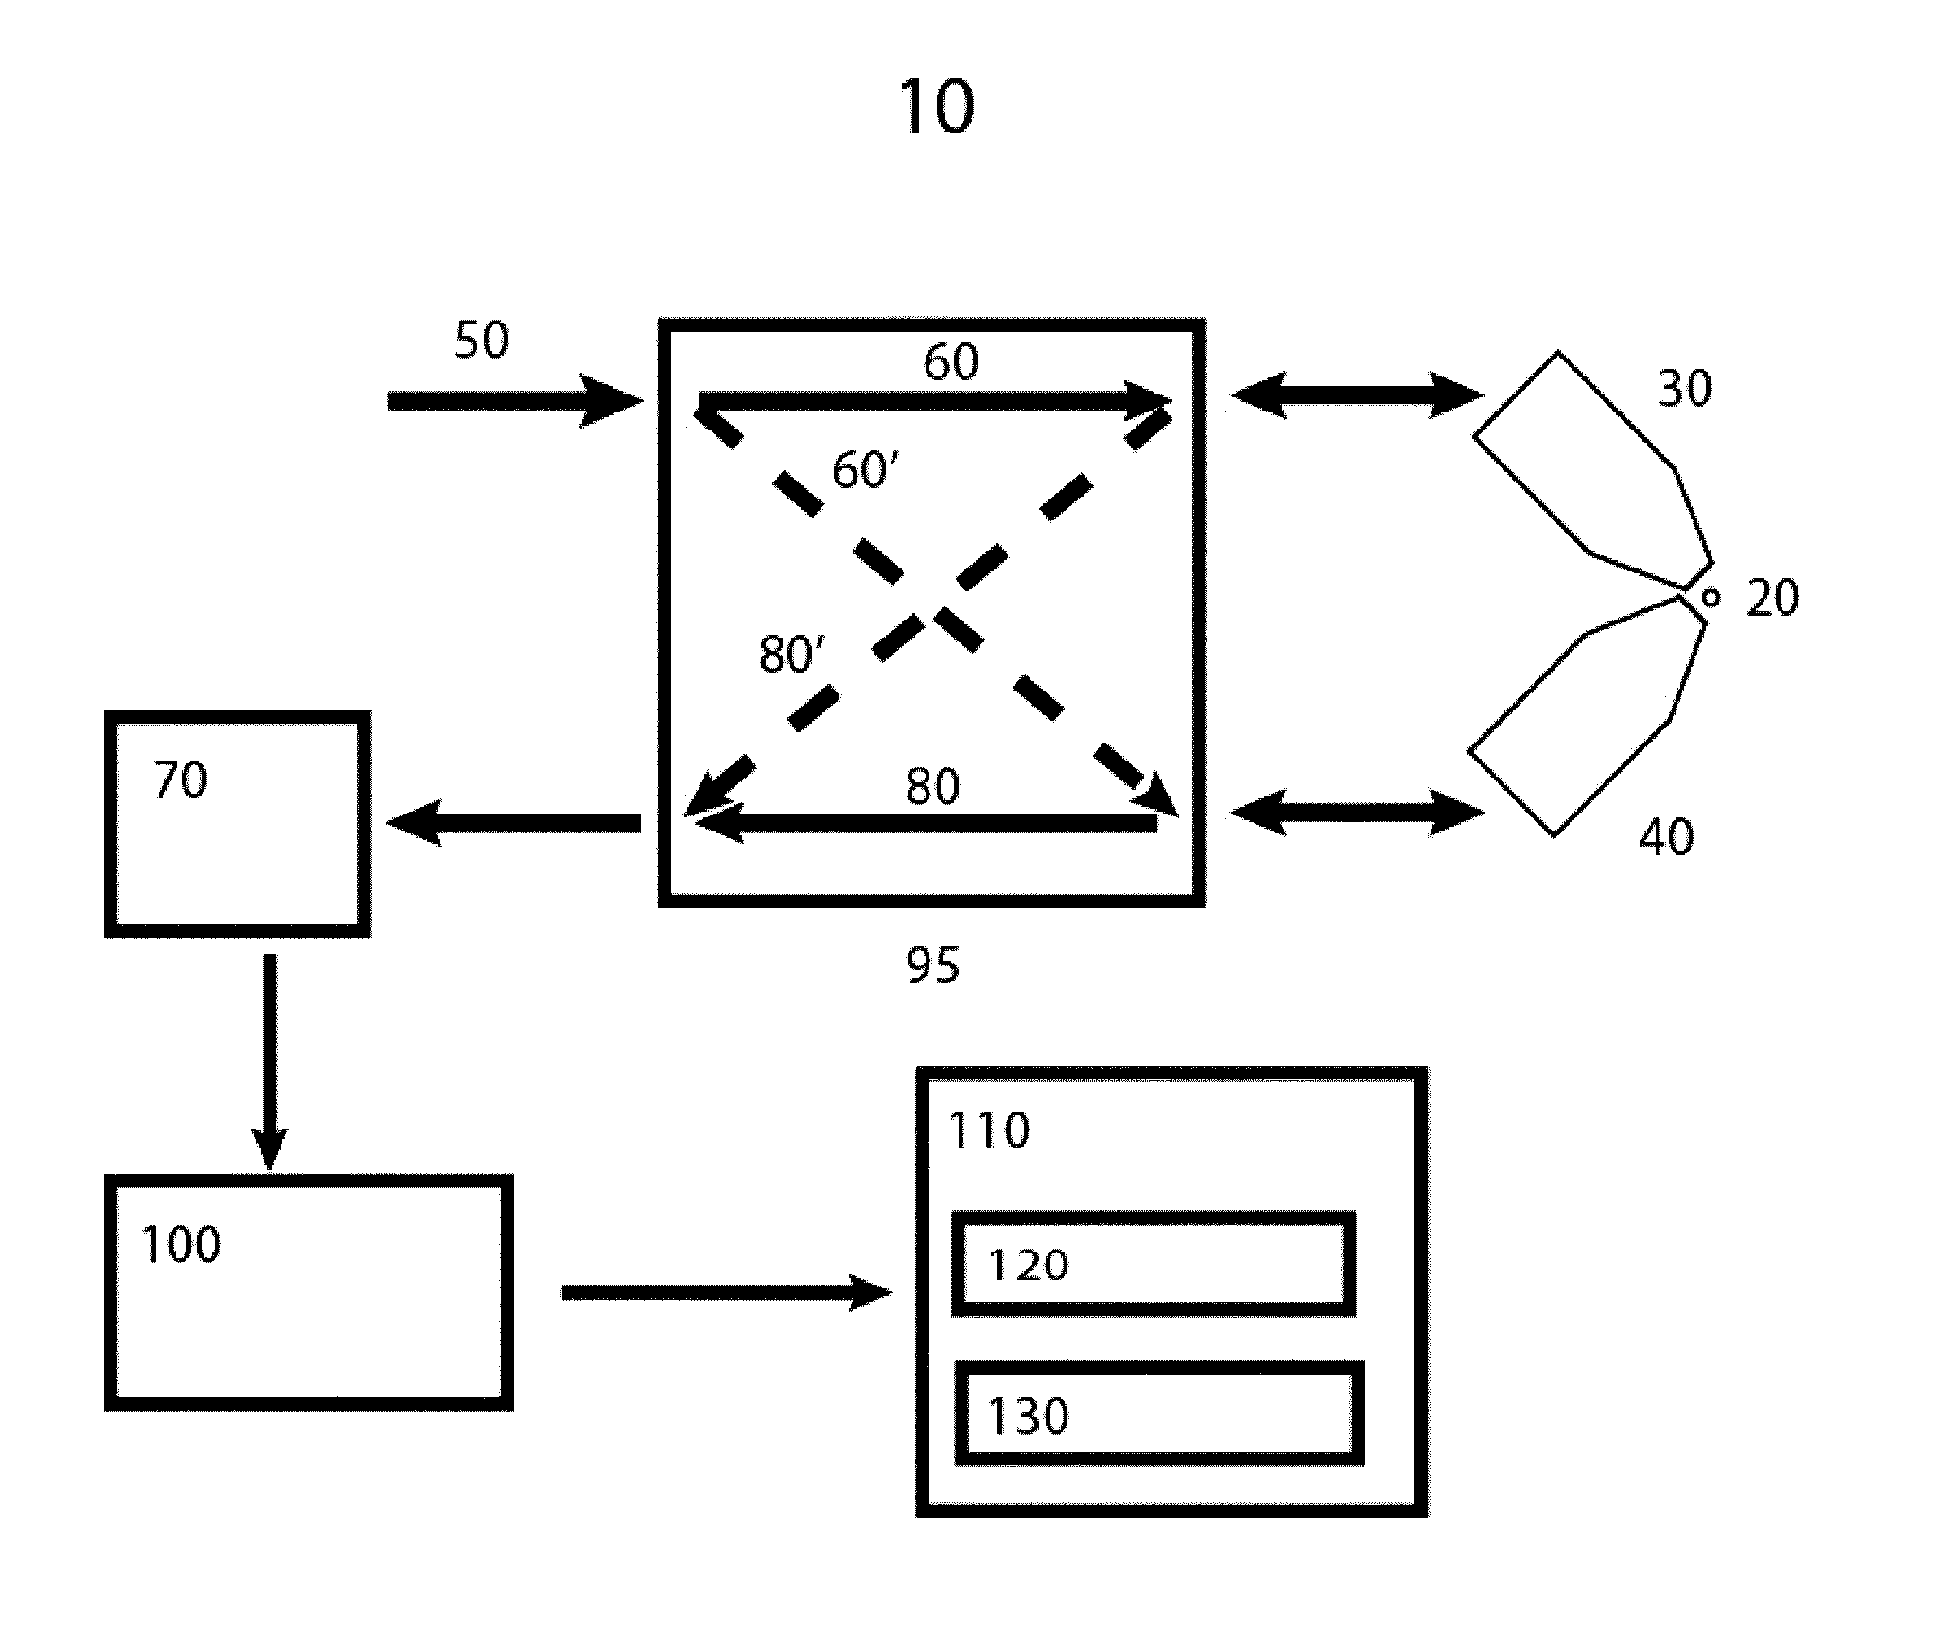 An optical arrangement and method for imaging a sample